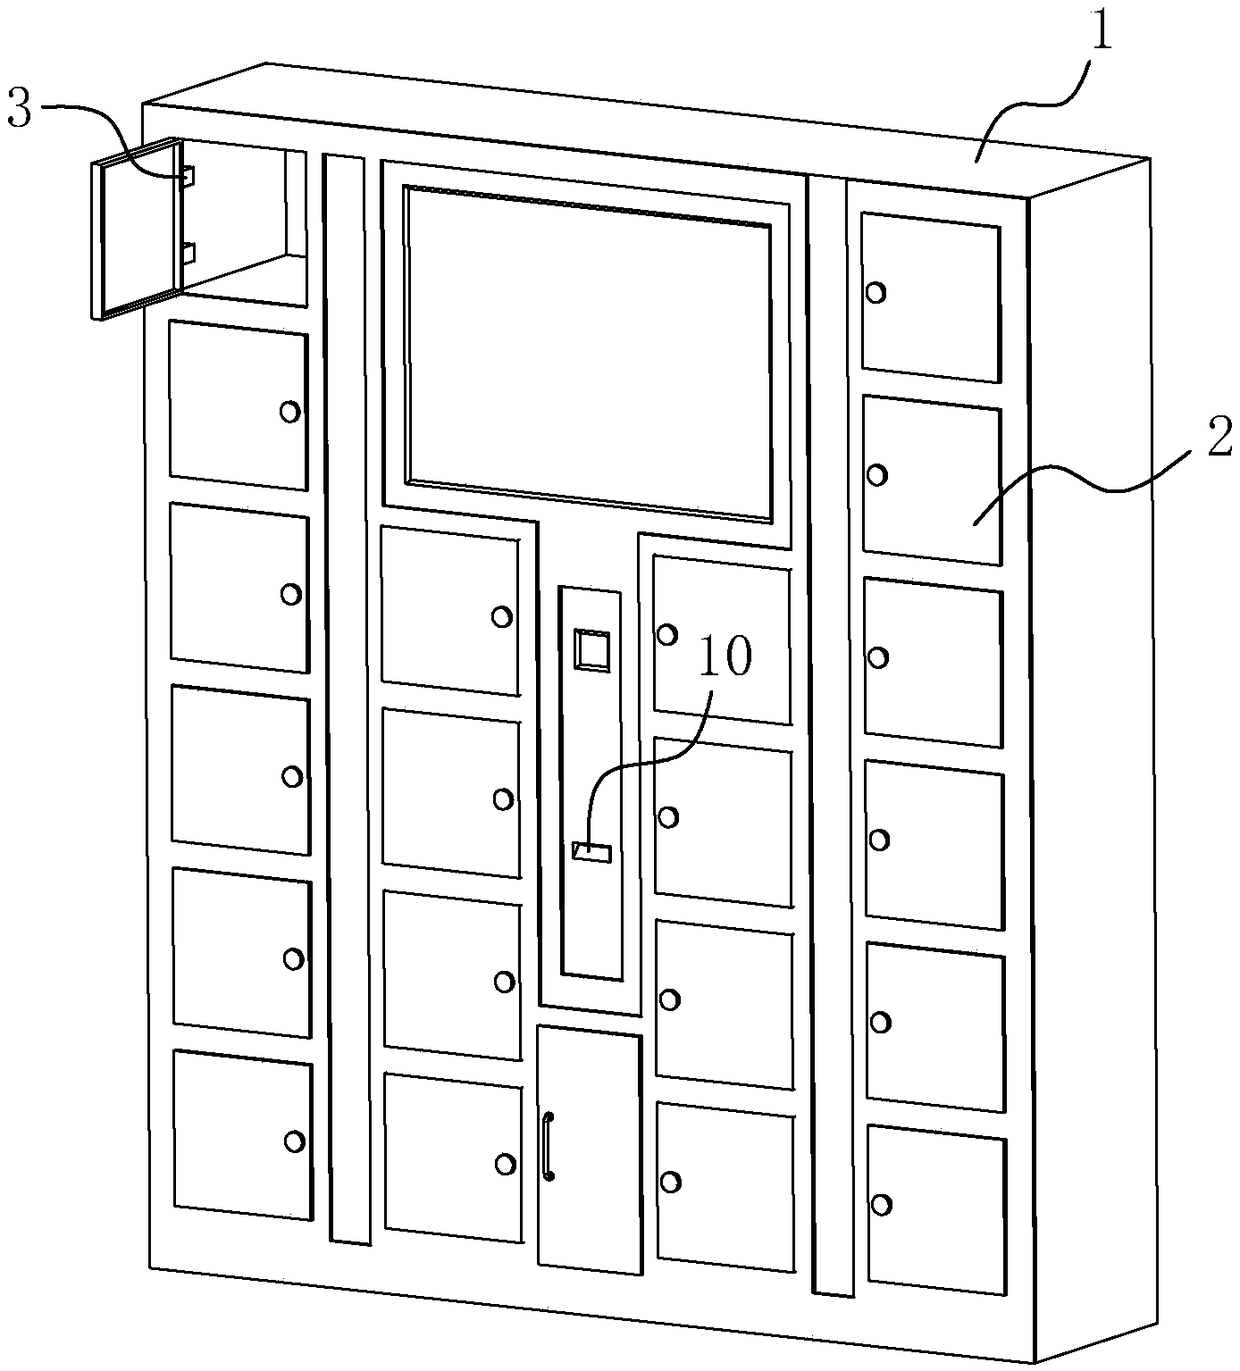 Safe and reliable intelligent locker system and management method